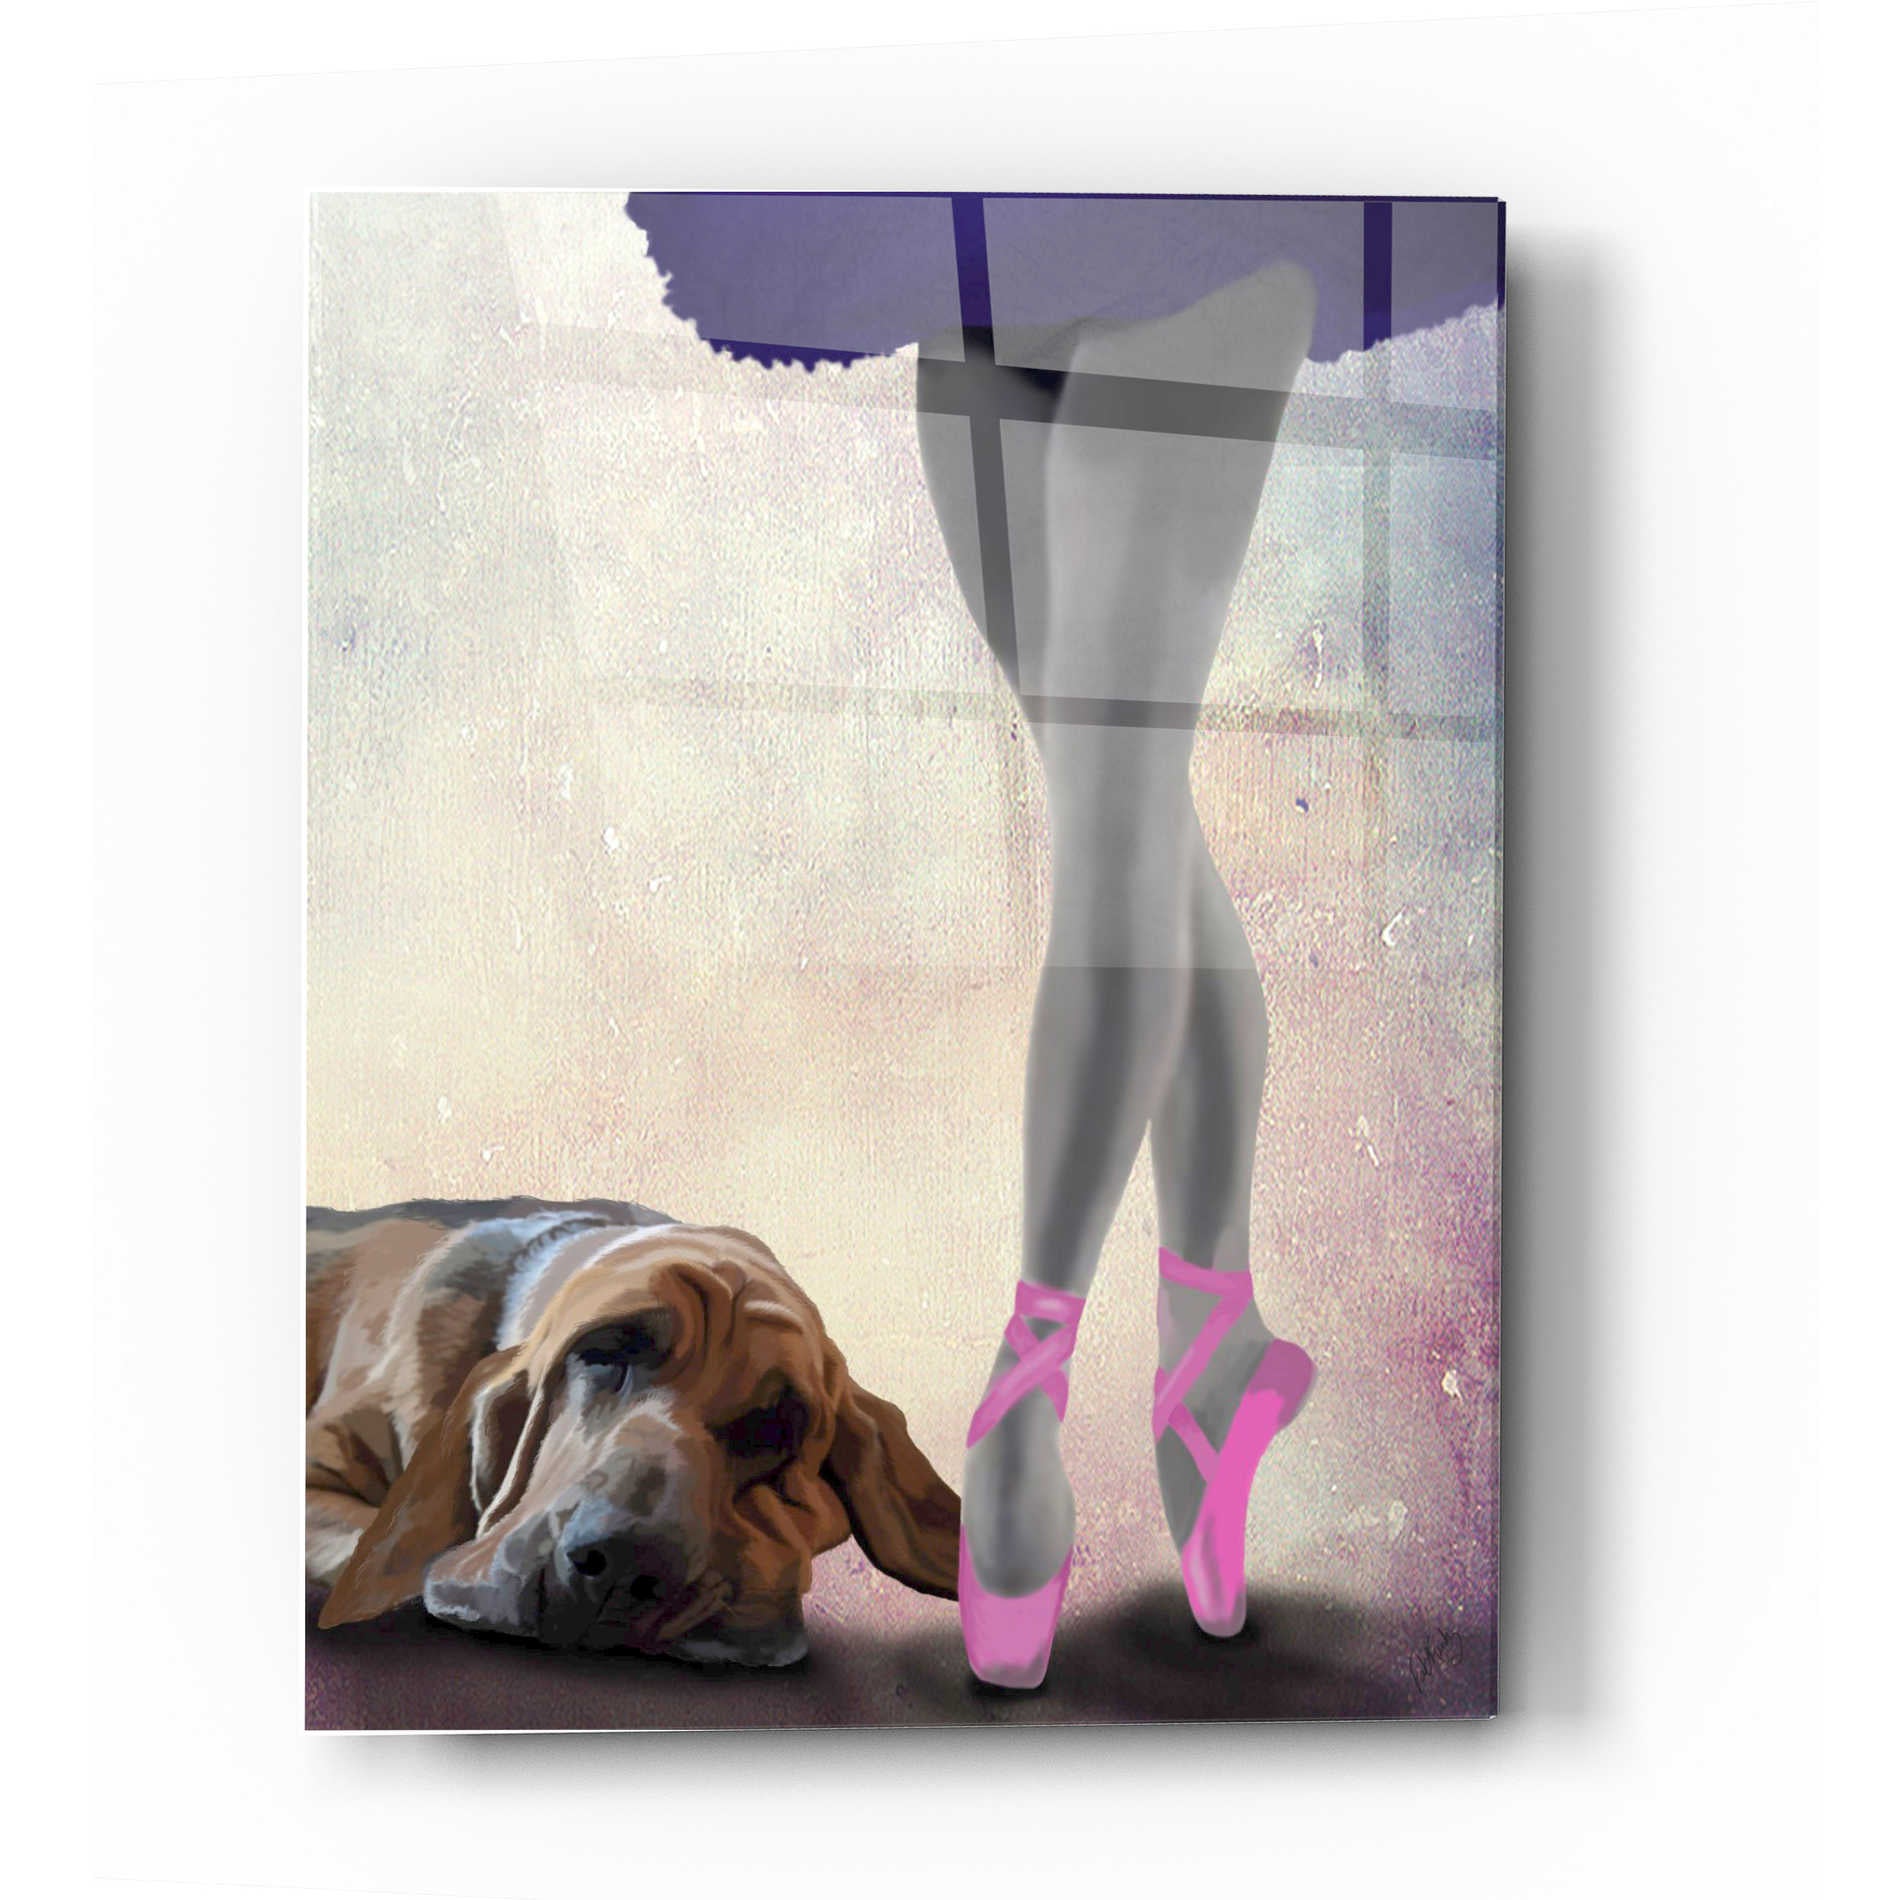 Epic Art 'Bloodhound And Ballet Dancer' by Fab Funky Acrylic Glass Wall Art,16x24